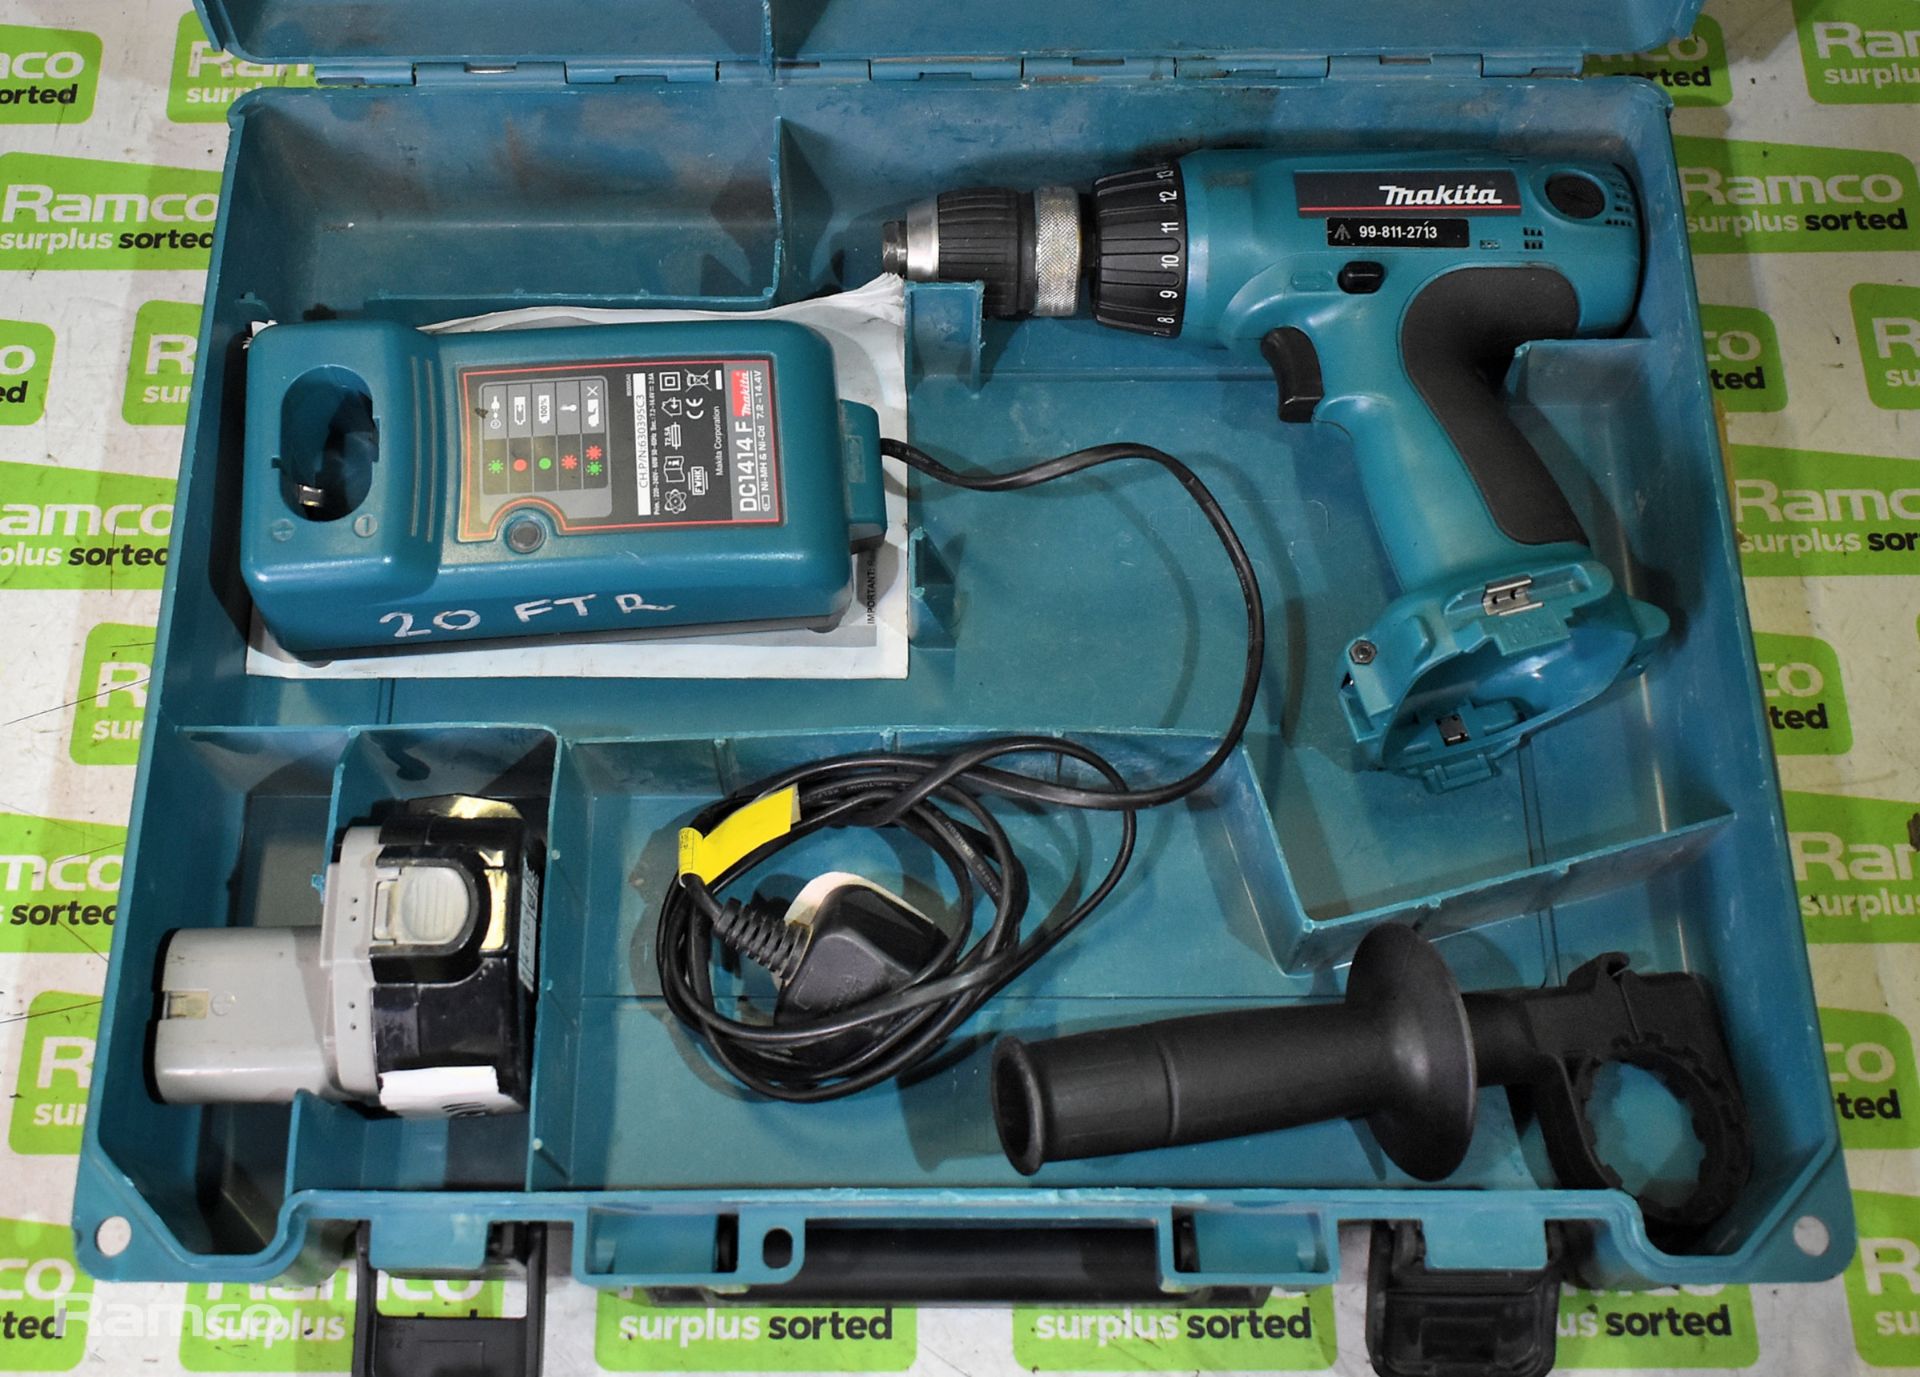 Makita 6317D cordless drill - DC1414F charger - 1x 12V battery - case - Image 2 of 5